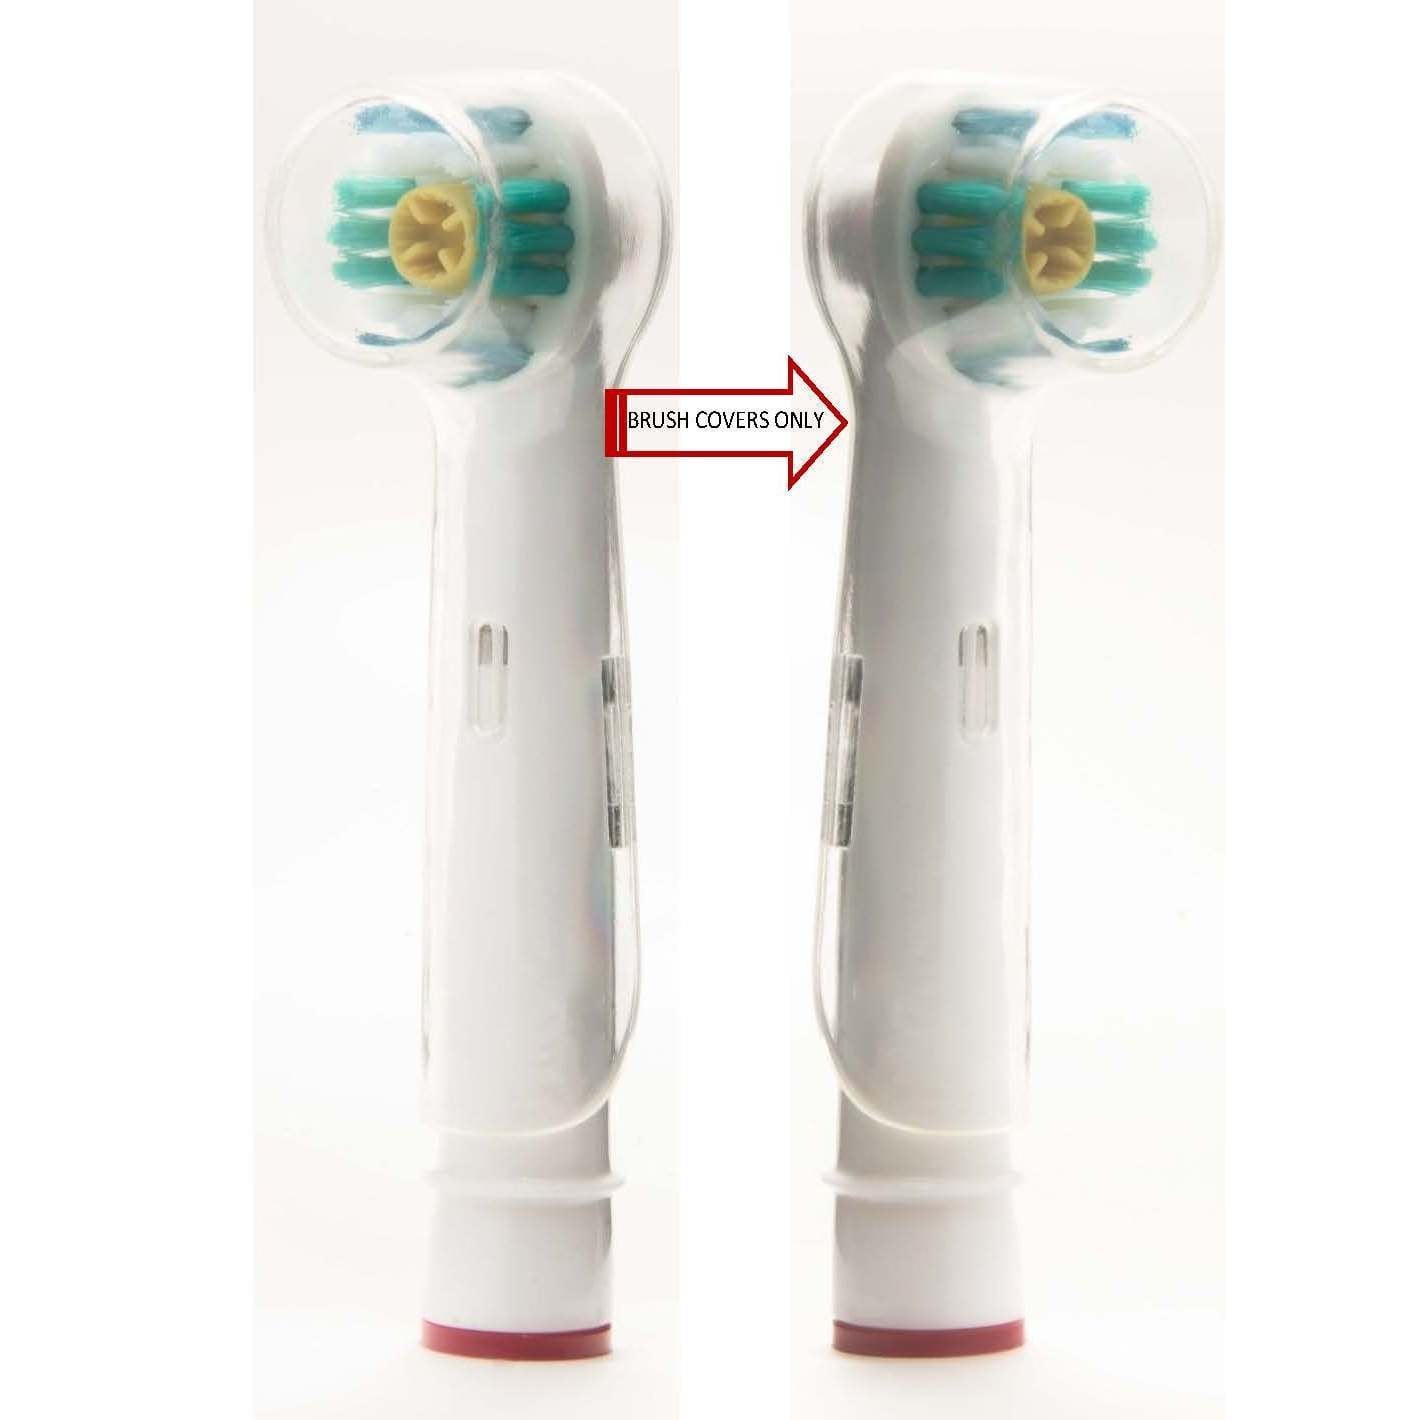 2/4 Pcs Electric Toothbrush Head Cover Set Protector For Braun Oral B Dust-proof 